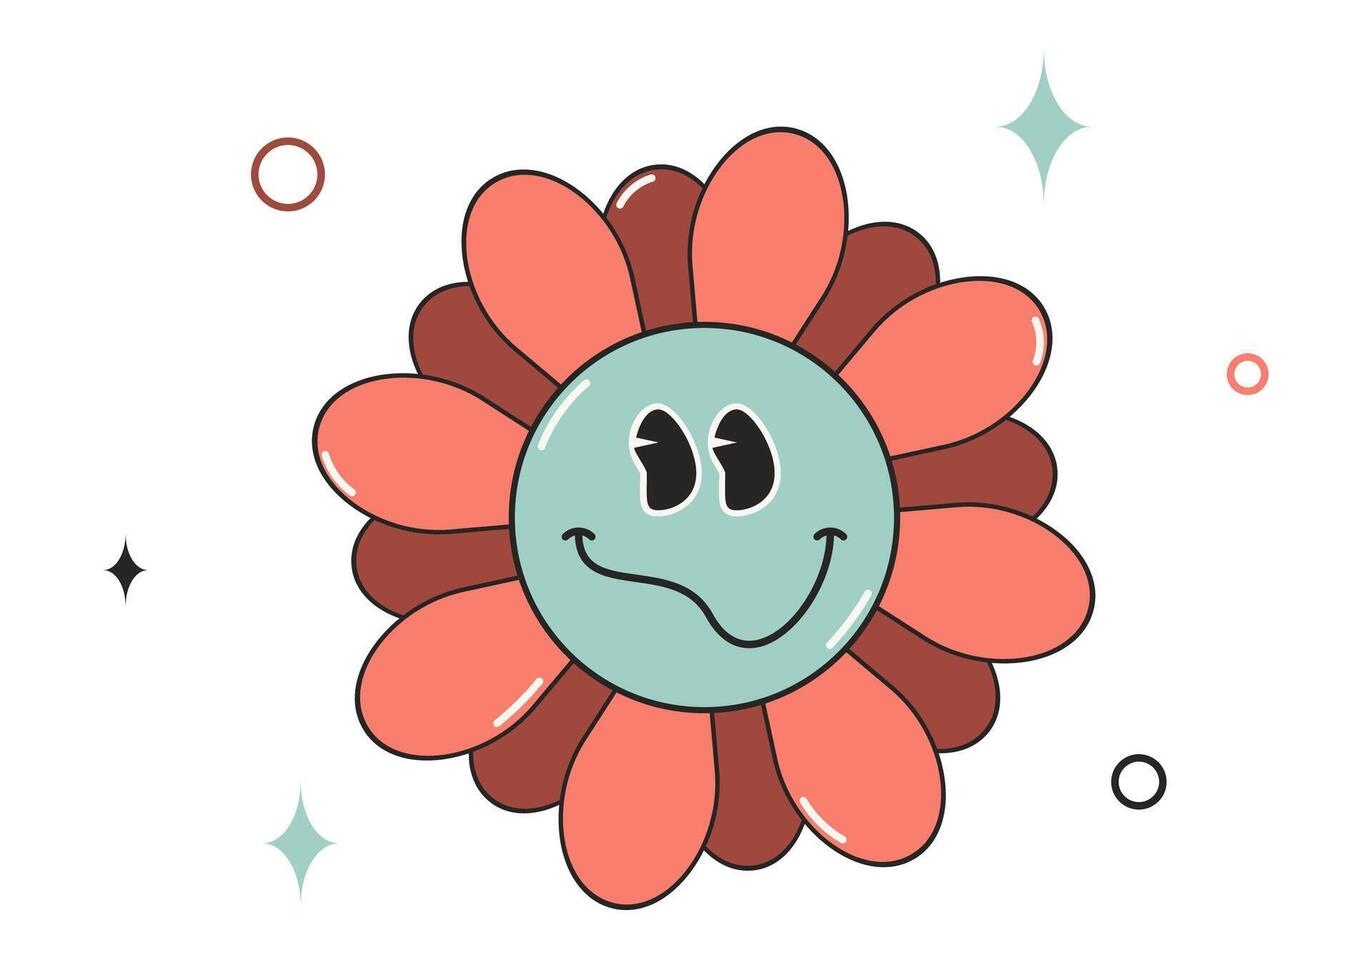 Funny groovy flower character. 70s style. Sticker, t-shirt design in trendy hippie style. Retro illustration isolated on a white background. vector